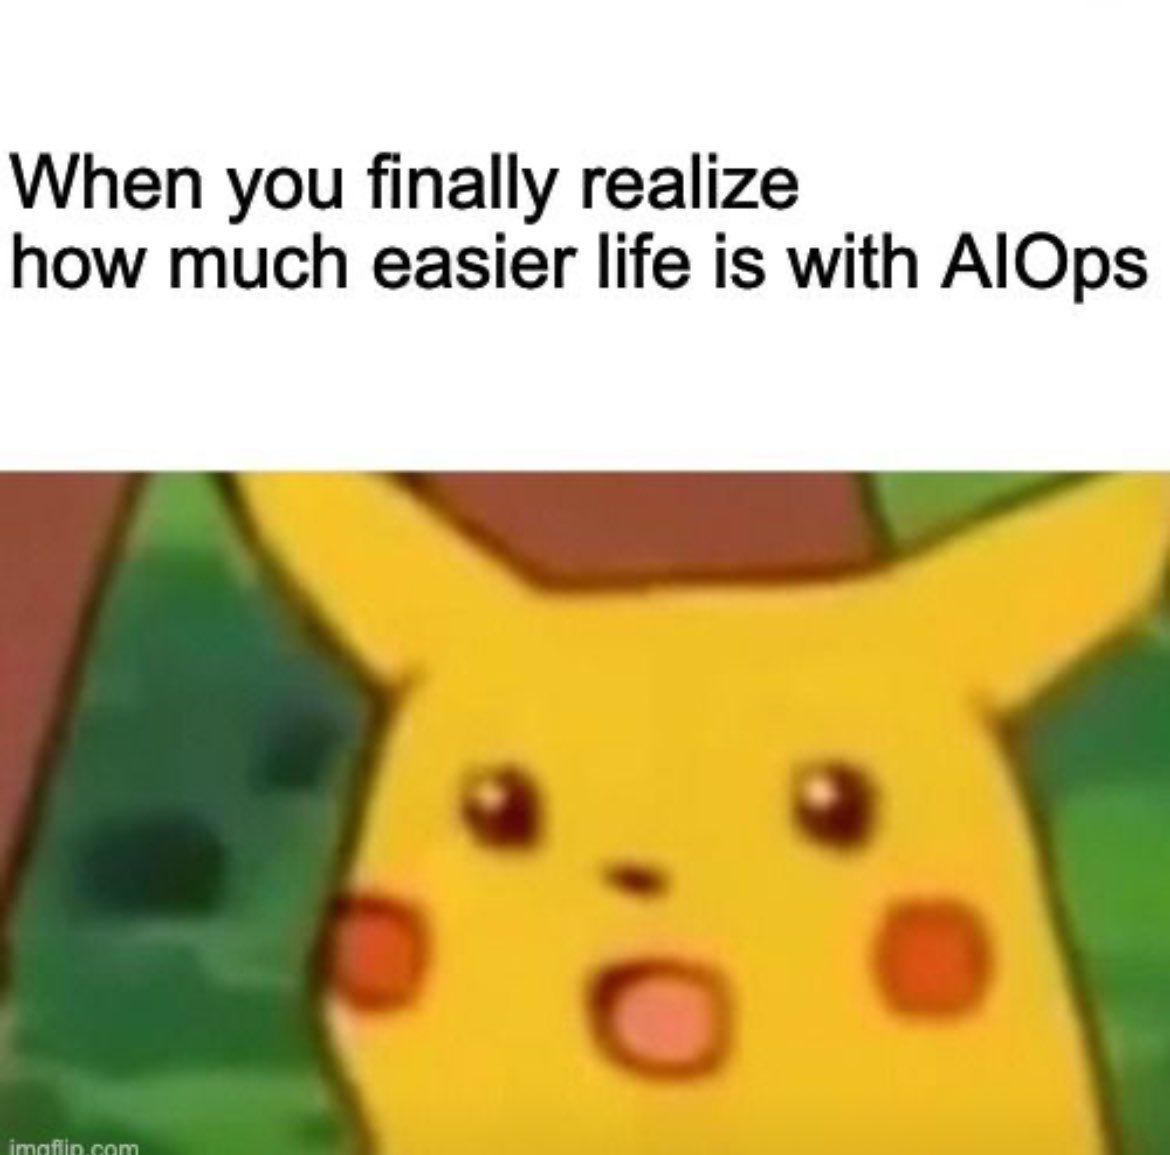 When we can amaze Pikachu with our AIOps systems, we're sure we can surprise you too! cloudfabrix.com/blog/aiops/aio… Visit our blog to discover the path to implementing AIOps within your organization. #aiops #itops #itoperations #ittransformation #digitaltransformation